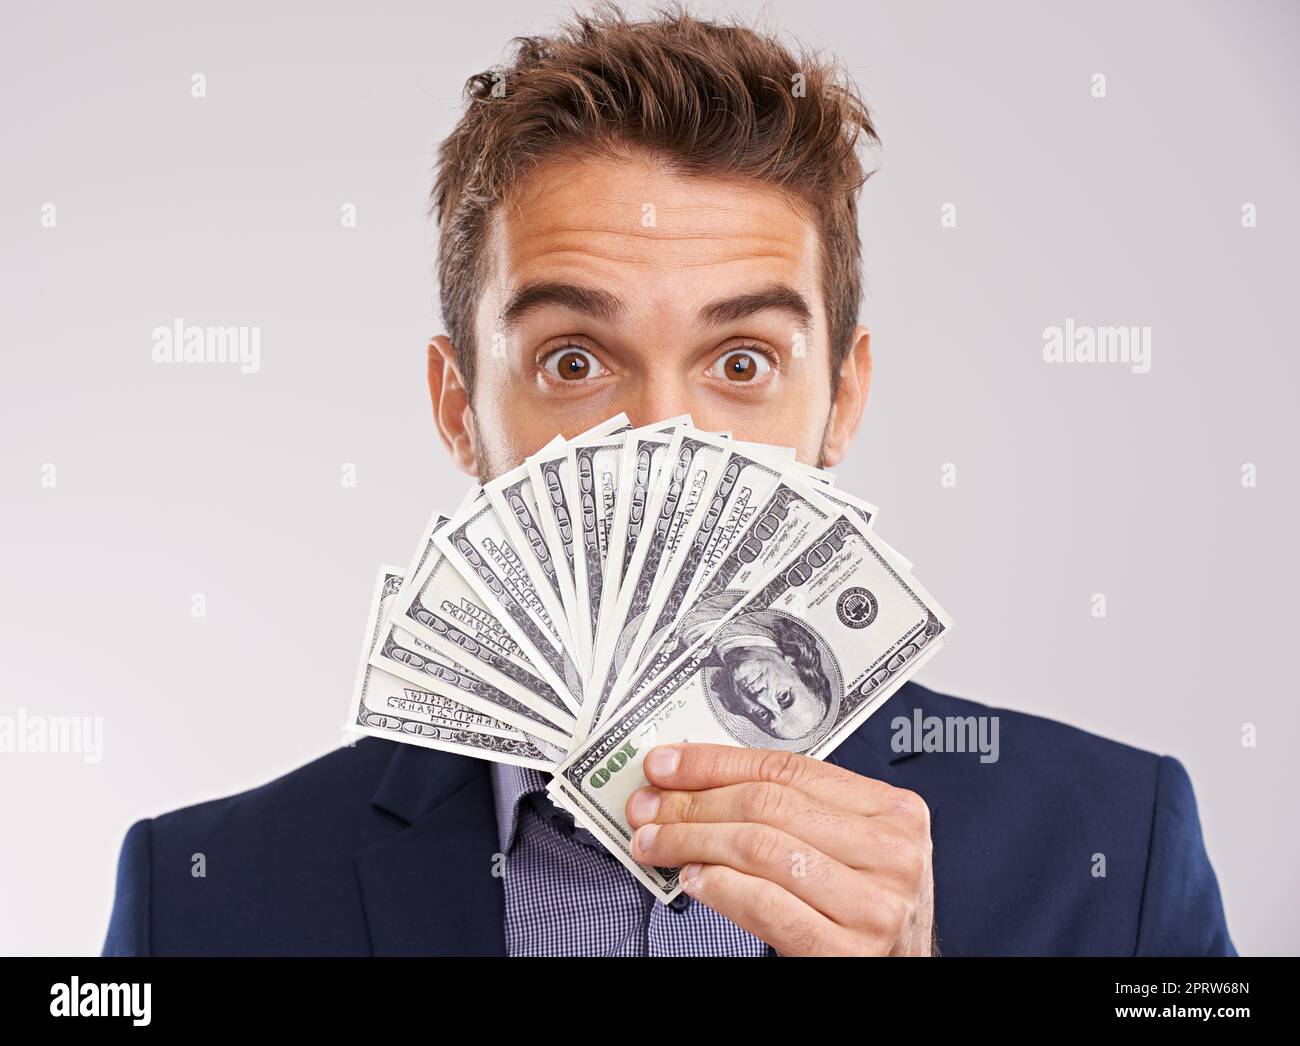 Show me the money. Studio shot of a businessman holding a fan of money in front of his face. Stock Photo